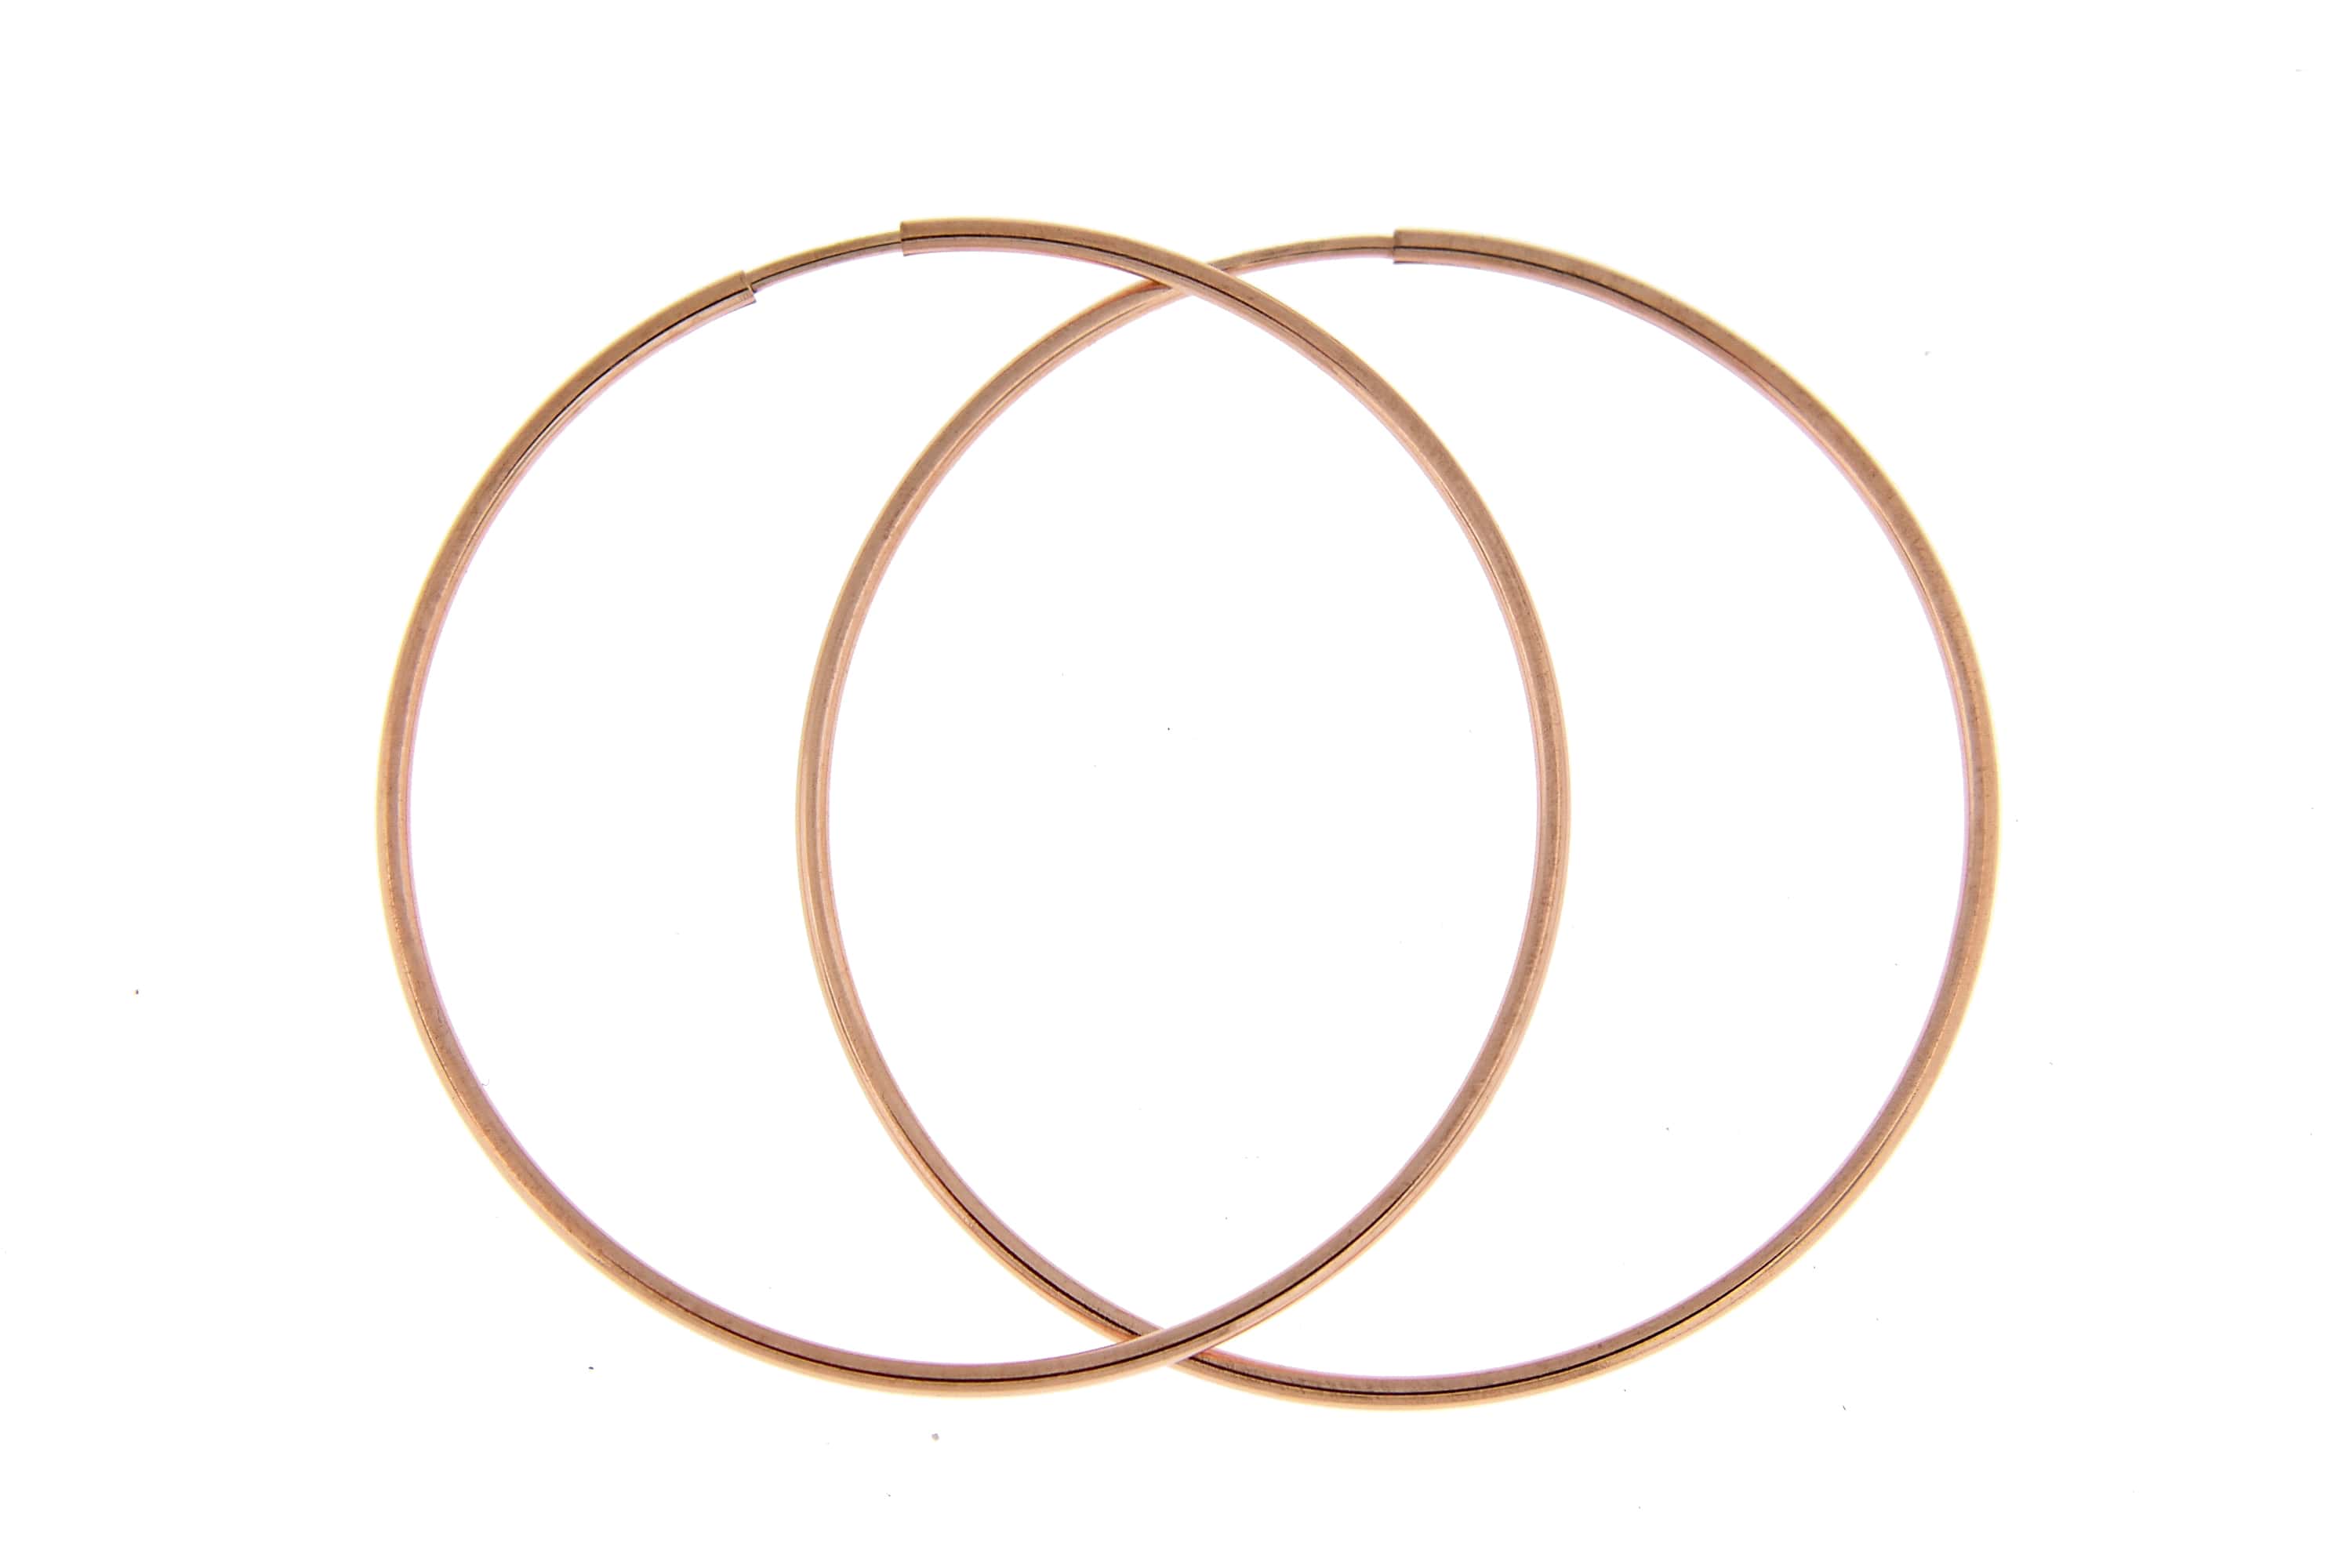 14k Rose Gold Classic Endless Round Hoop Earrings 41mm x 1.25mm